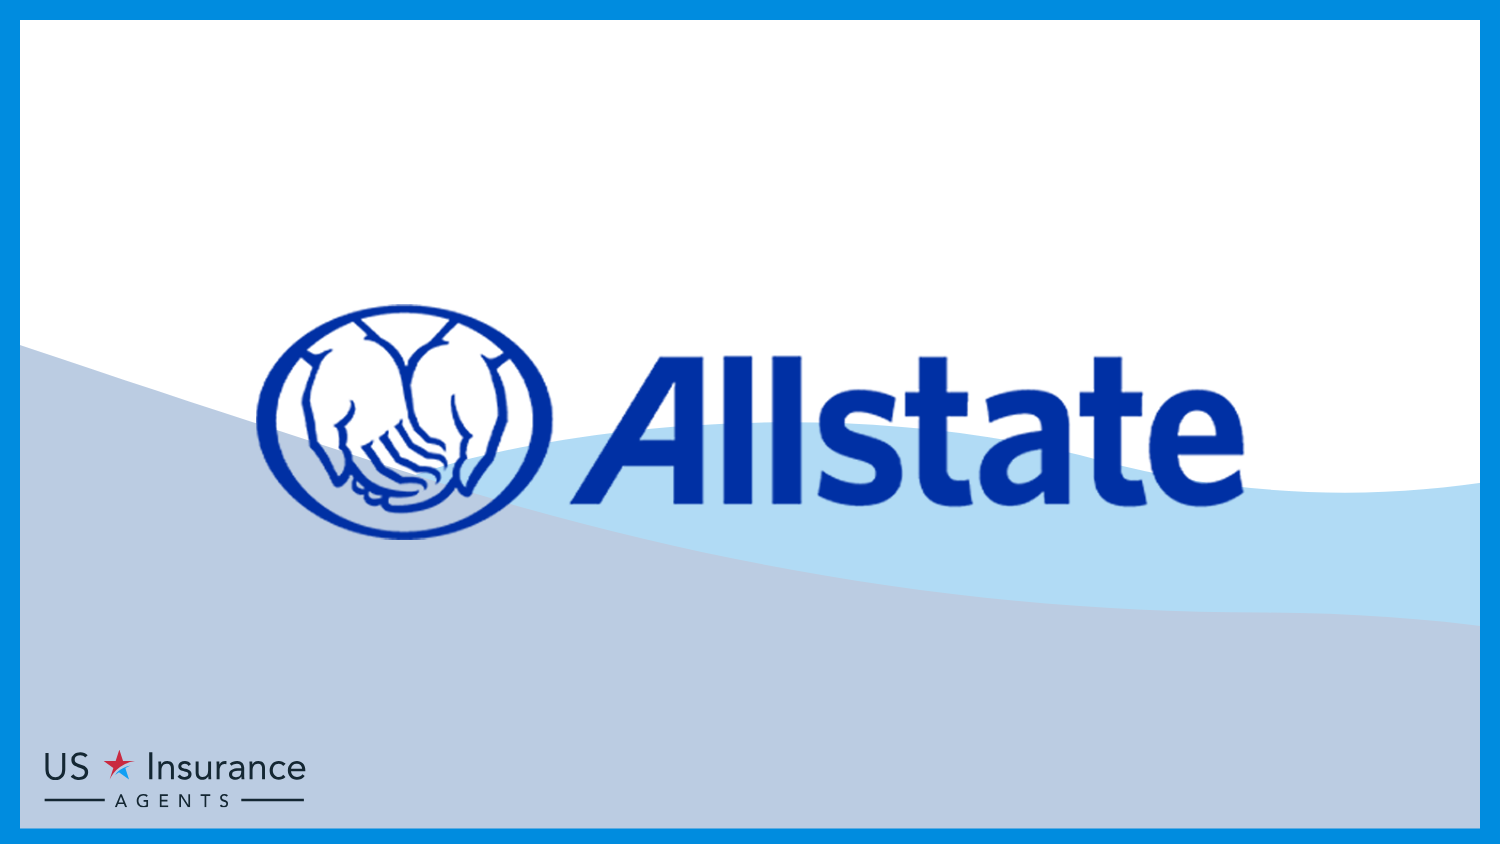 Allstate: Best Business Insurance for Event Planners